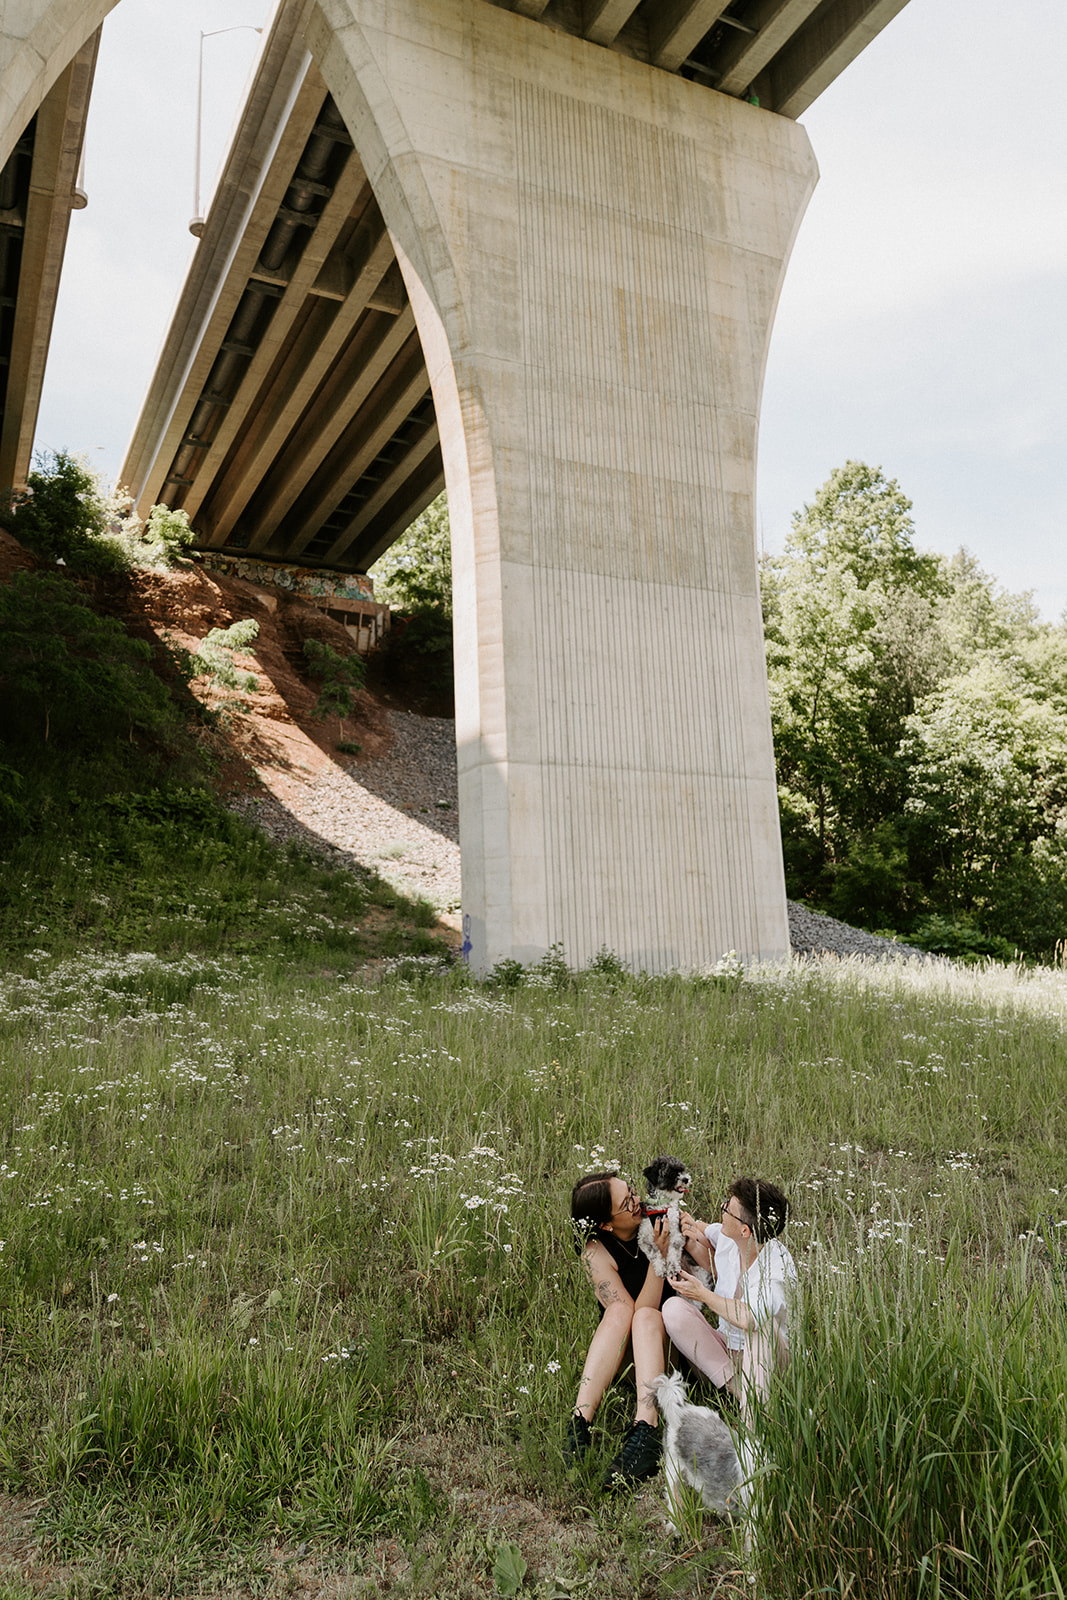 Two people sitting on the grass underneath an overpass.